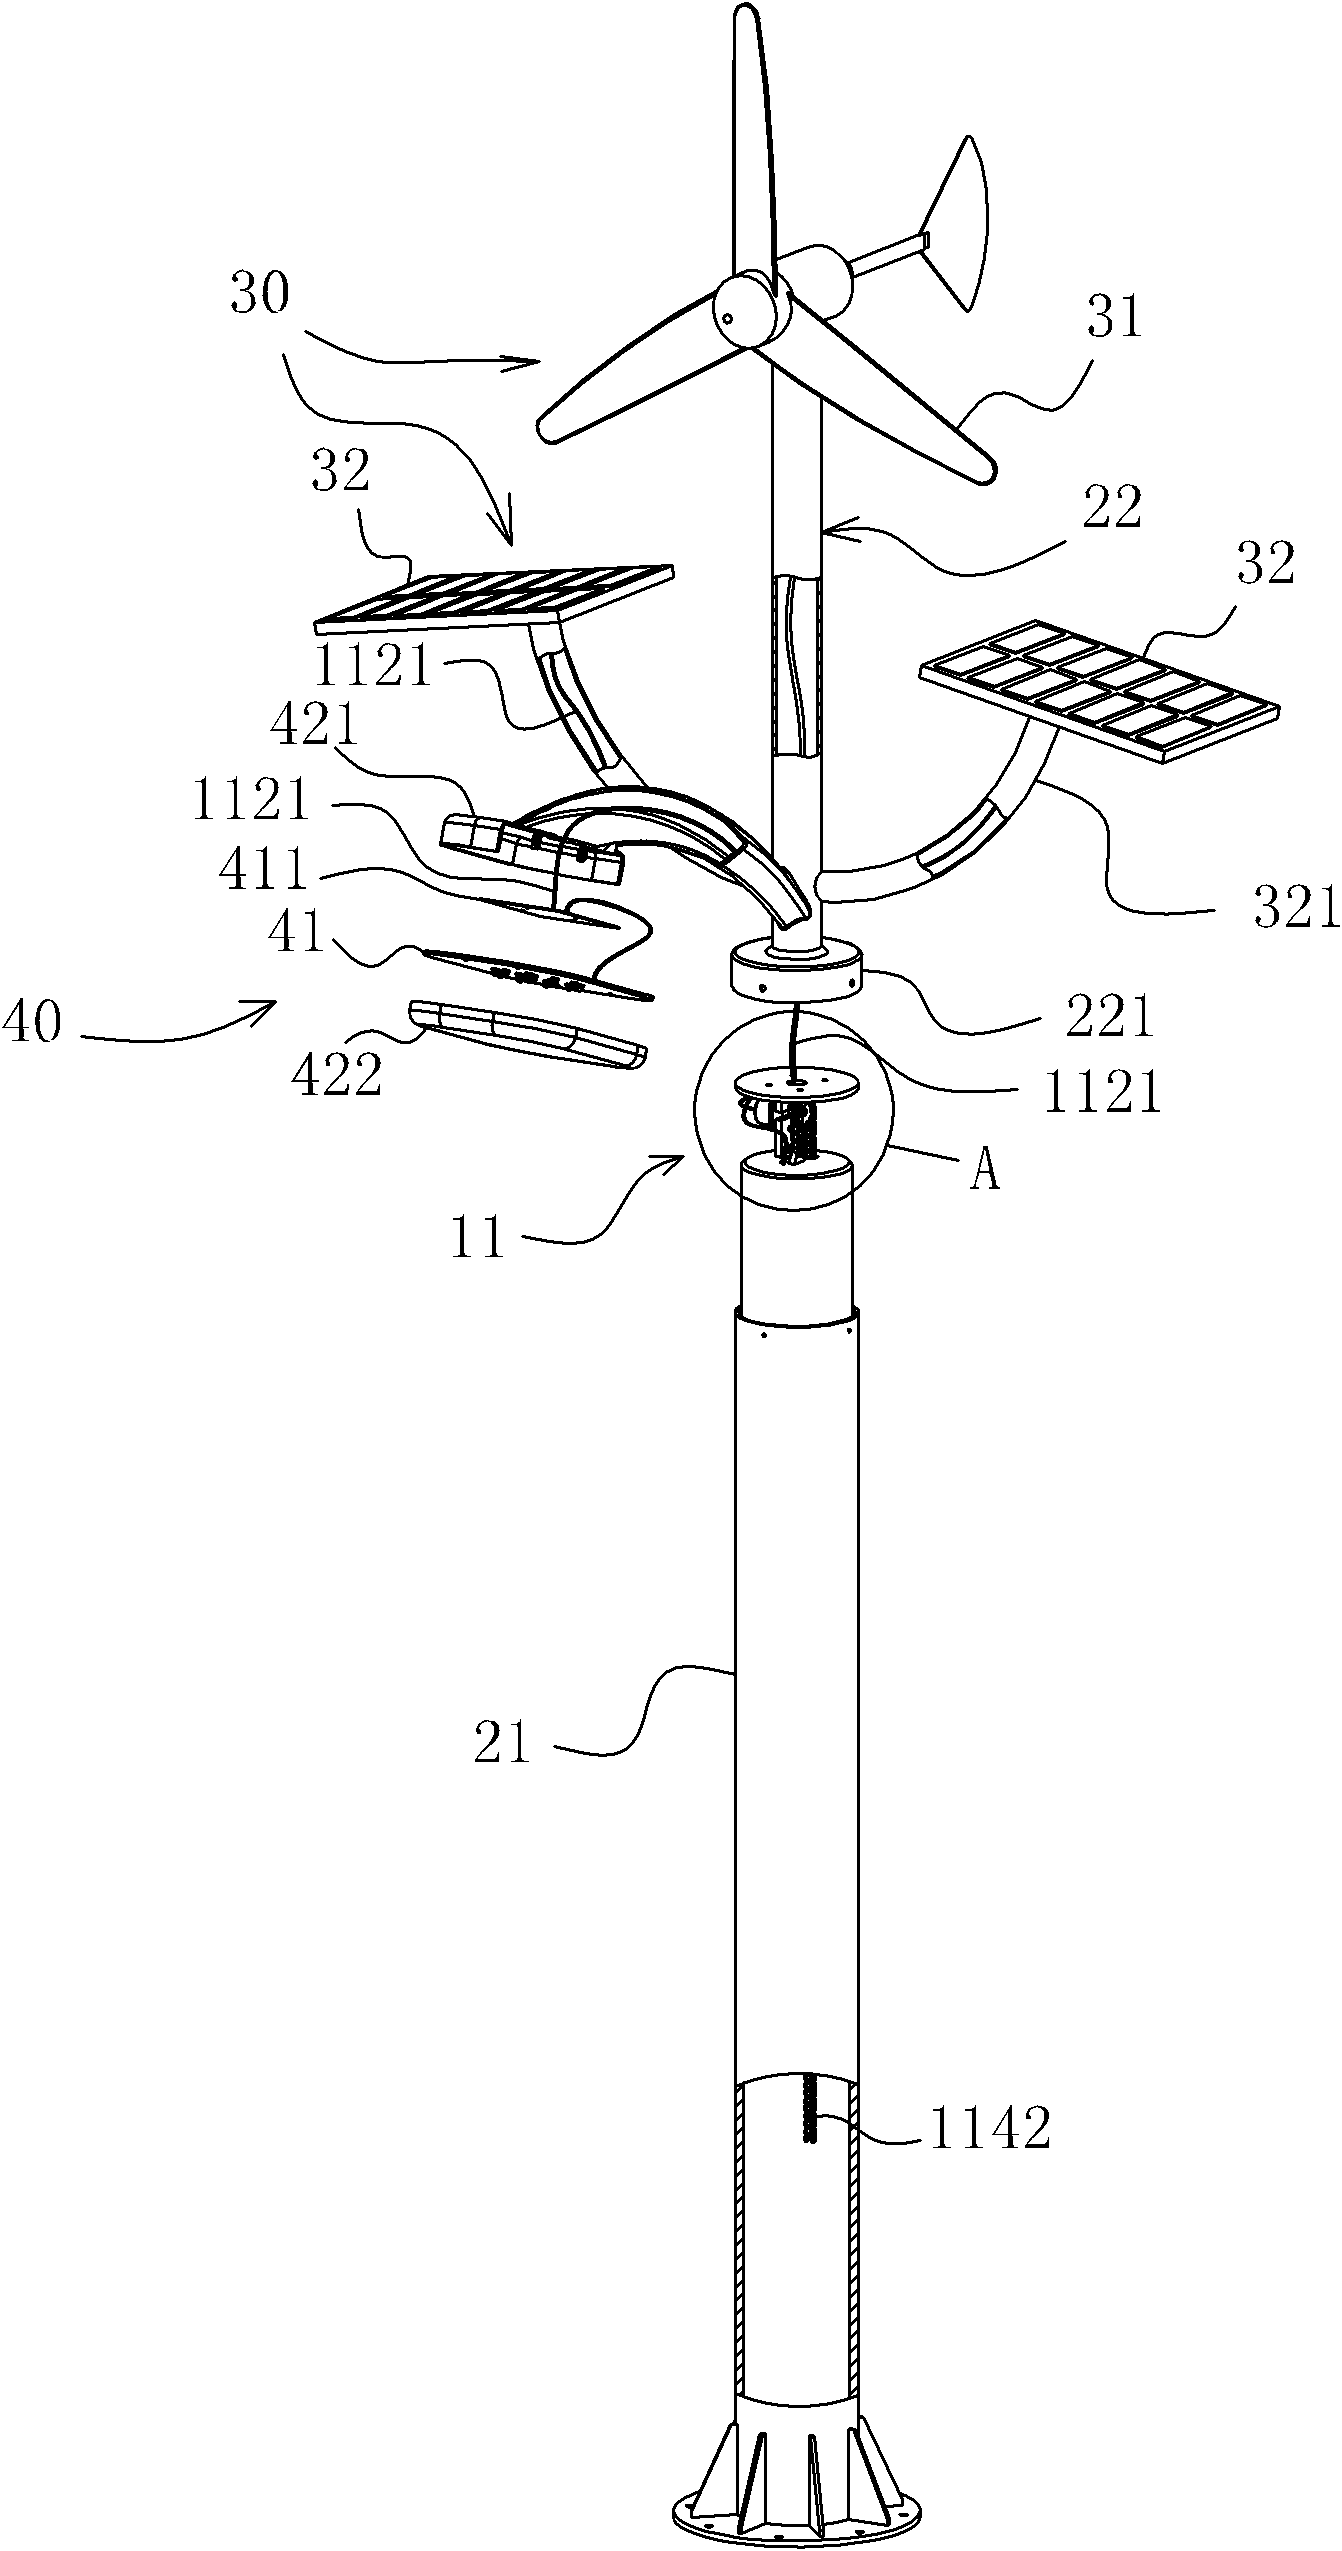 Self-power generation type street lamp utilizing potential energy for power generation